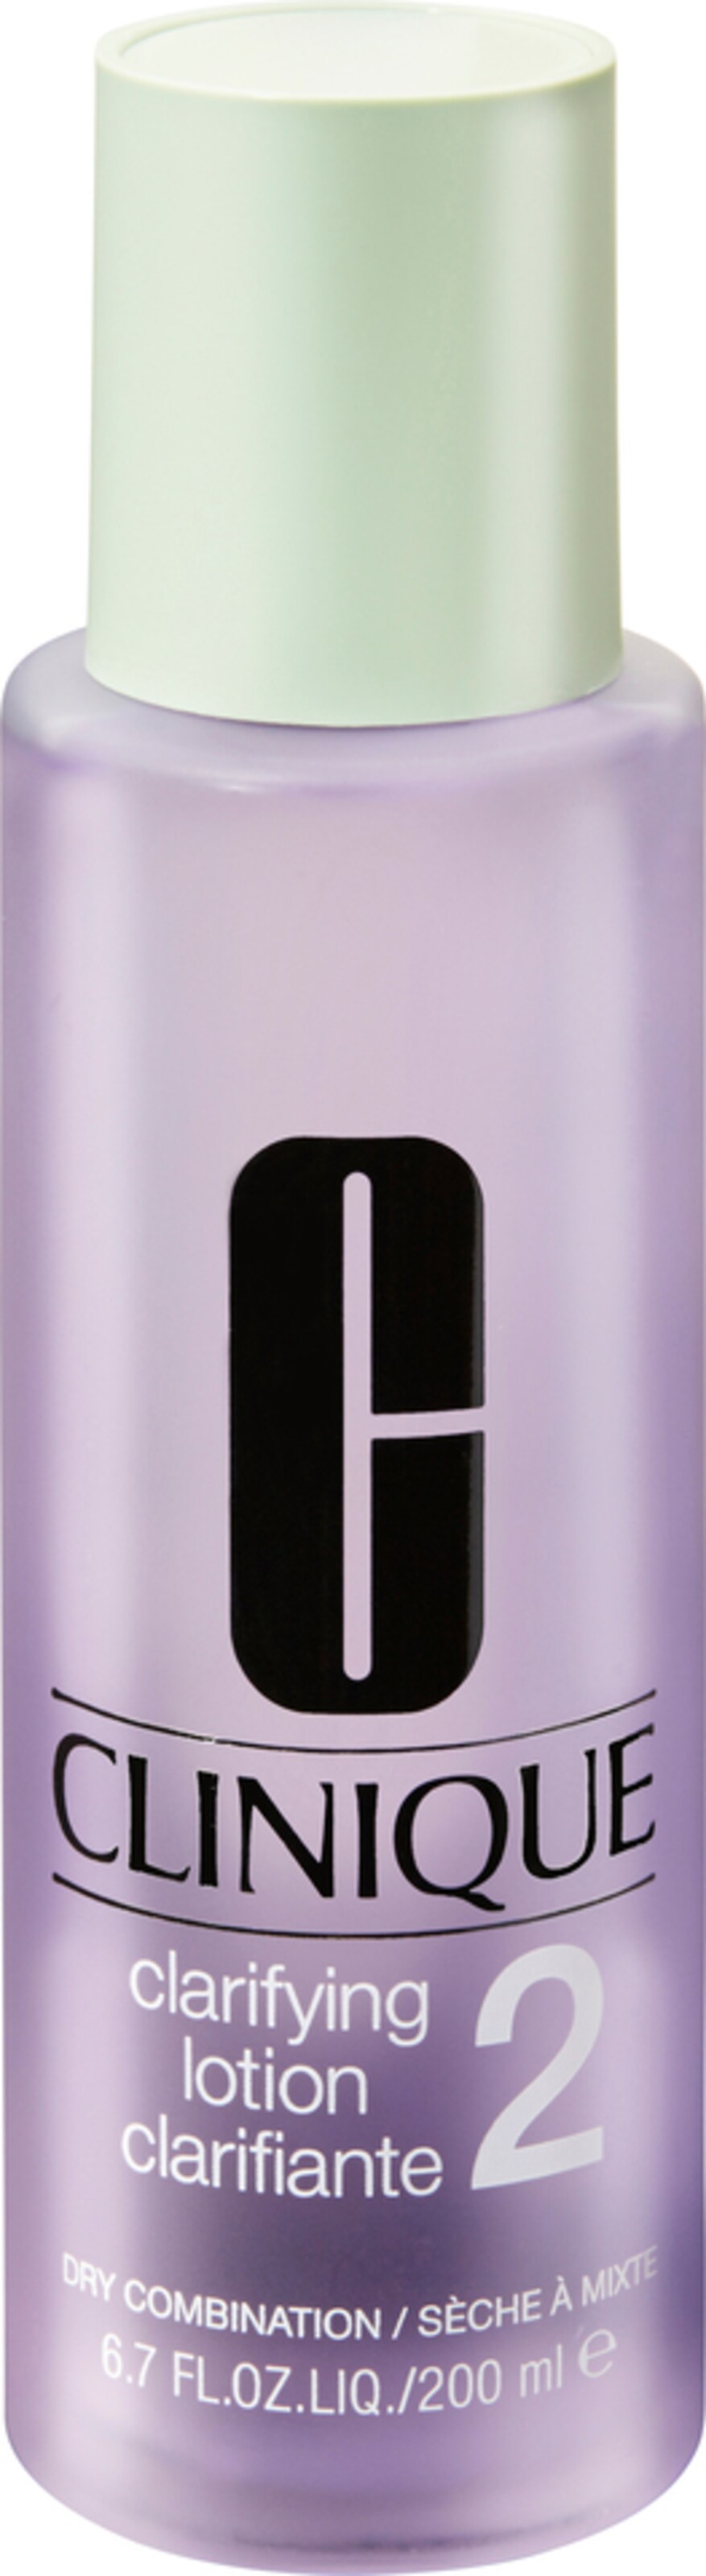 CLINIQUE Clarifying Lotion 2, Gesichtswasser in Lila 